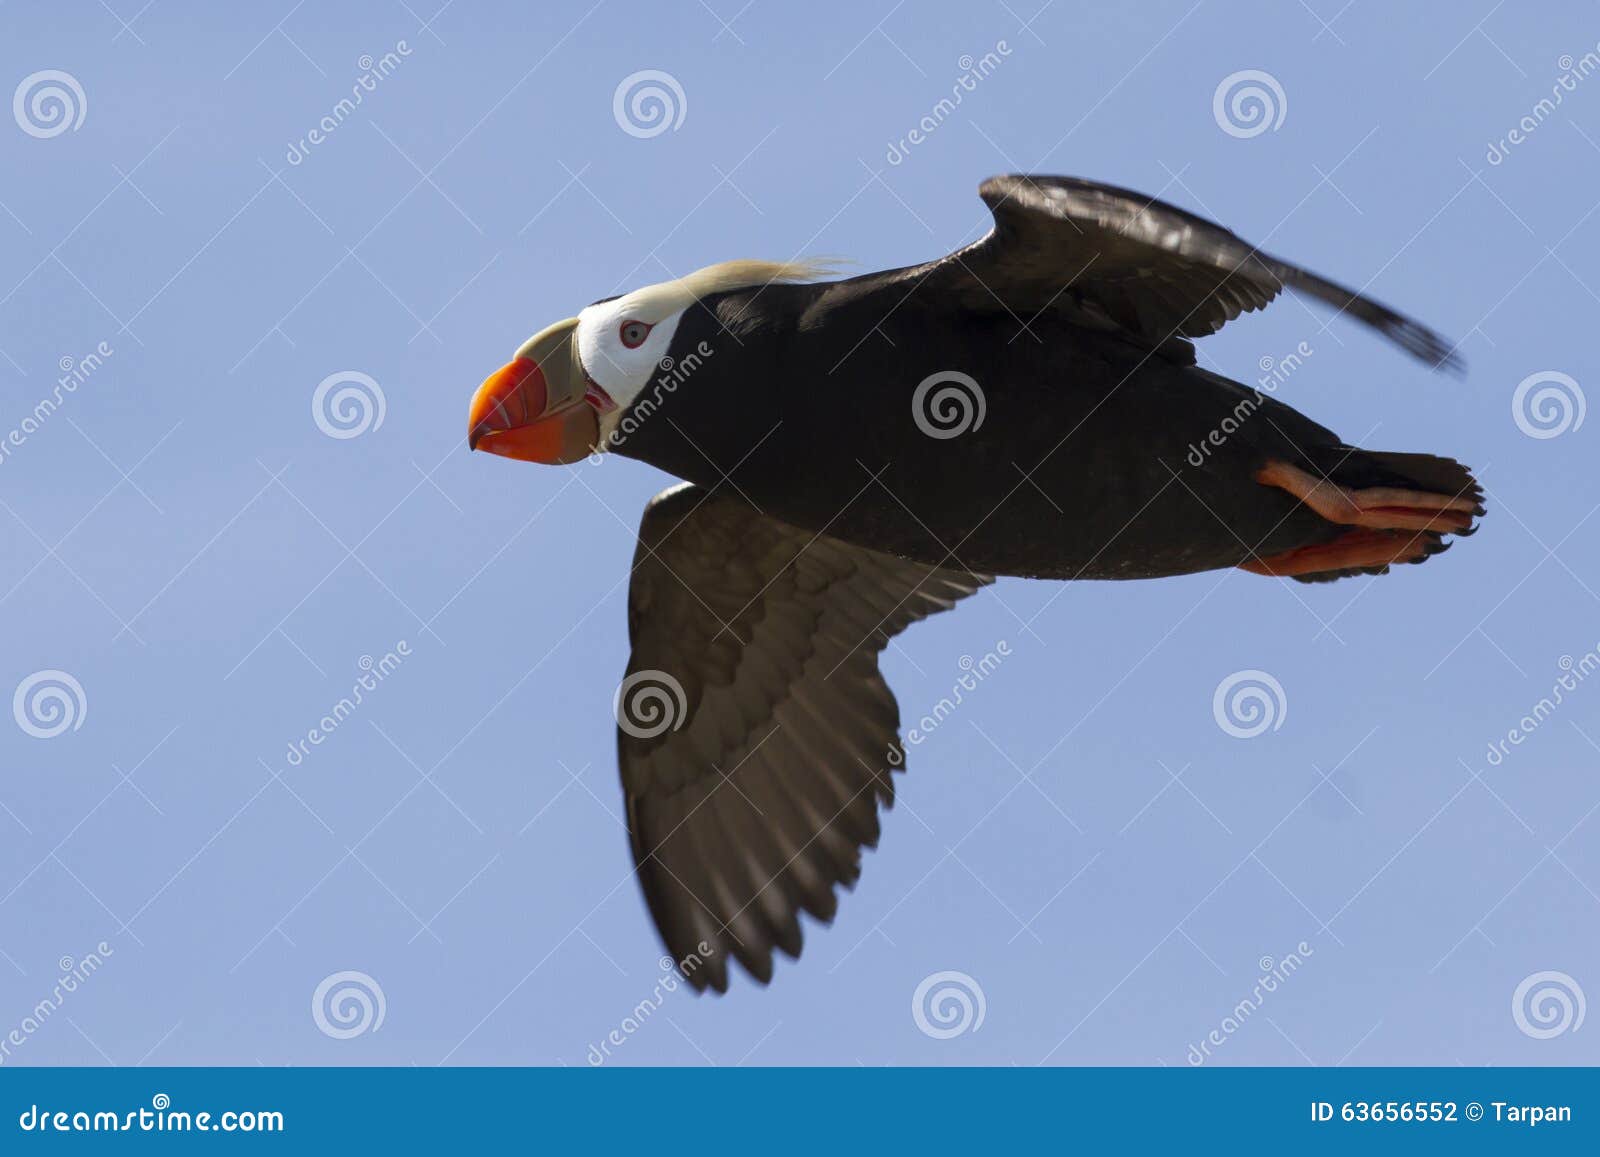 tufted puffin flying over the island cloudless summer